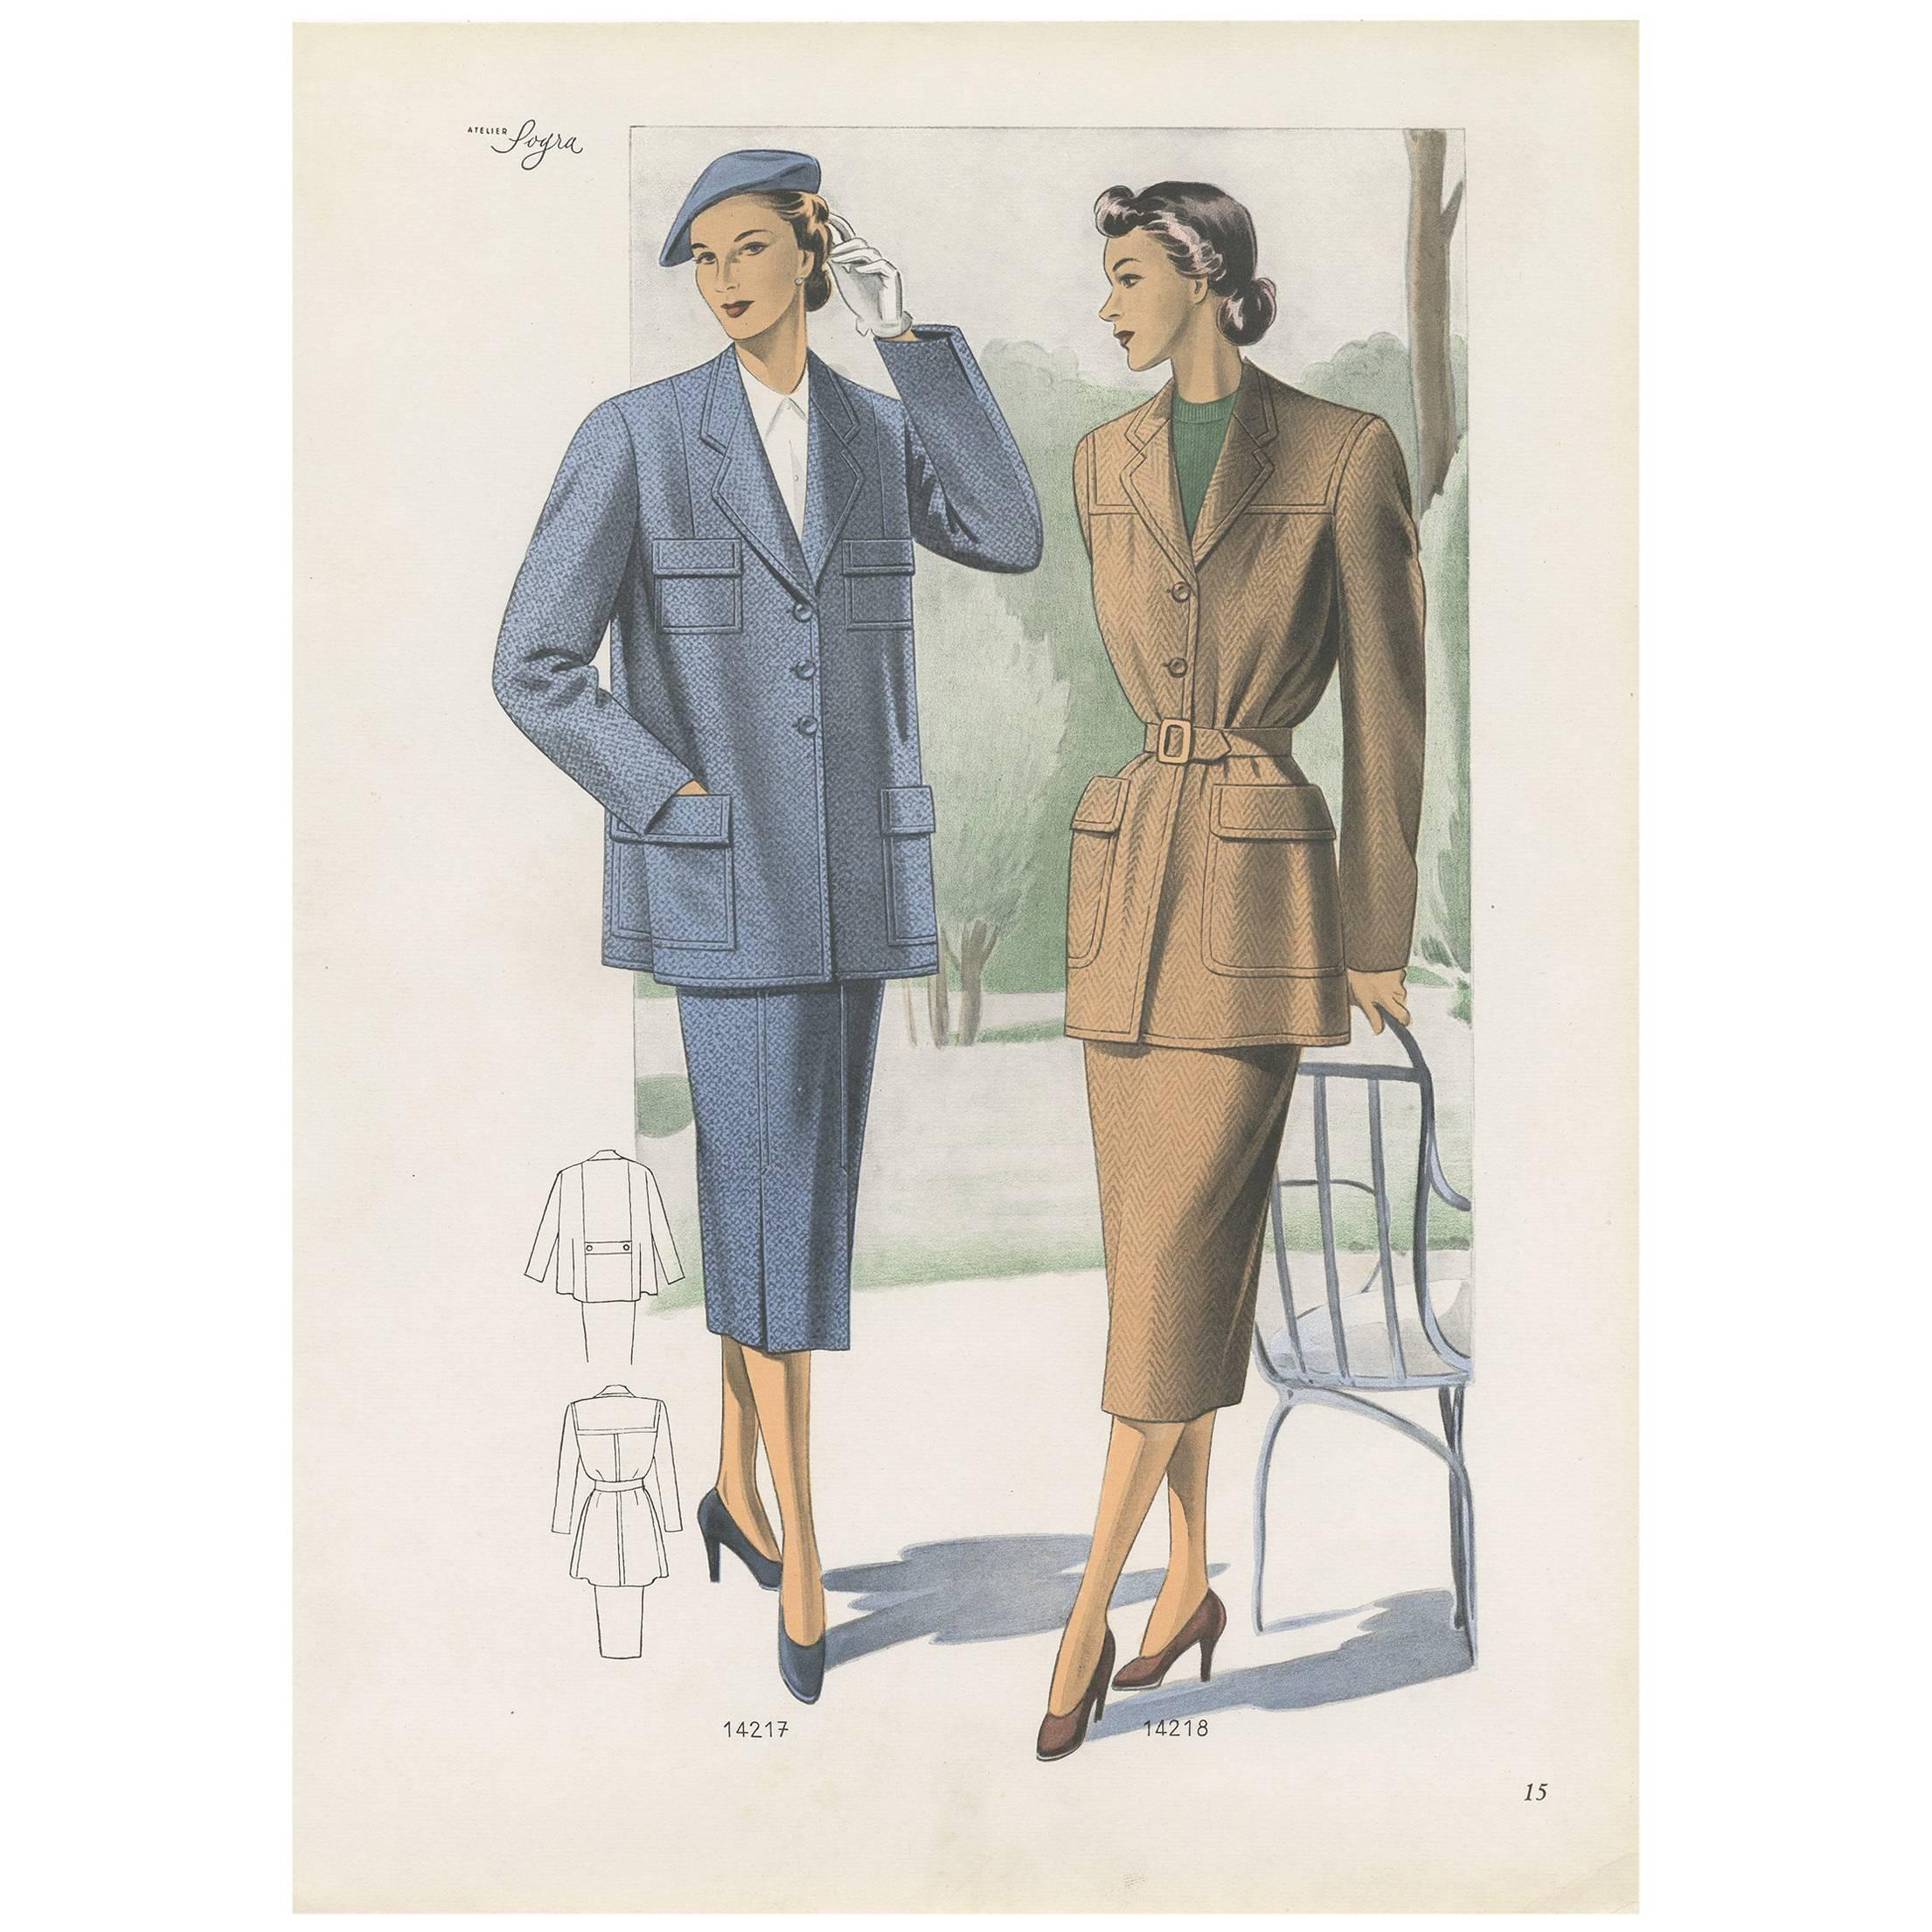 Vintage Fashion Print 'Pl. 14217' Published in Ladies Styles, 1951